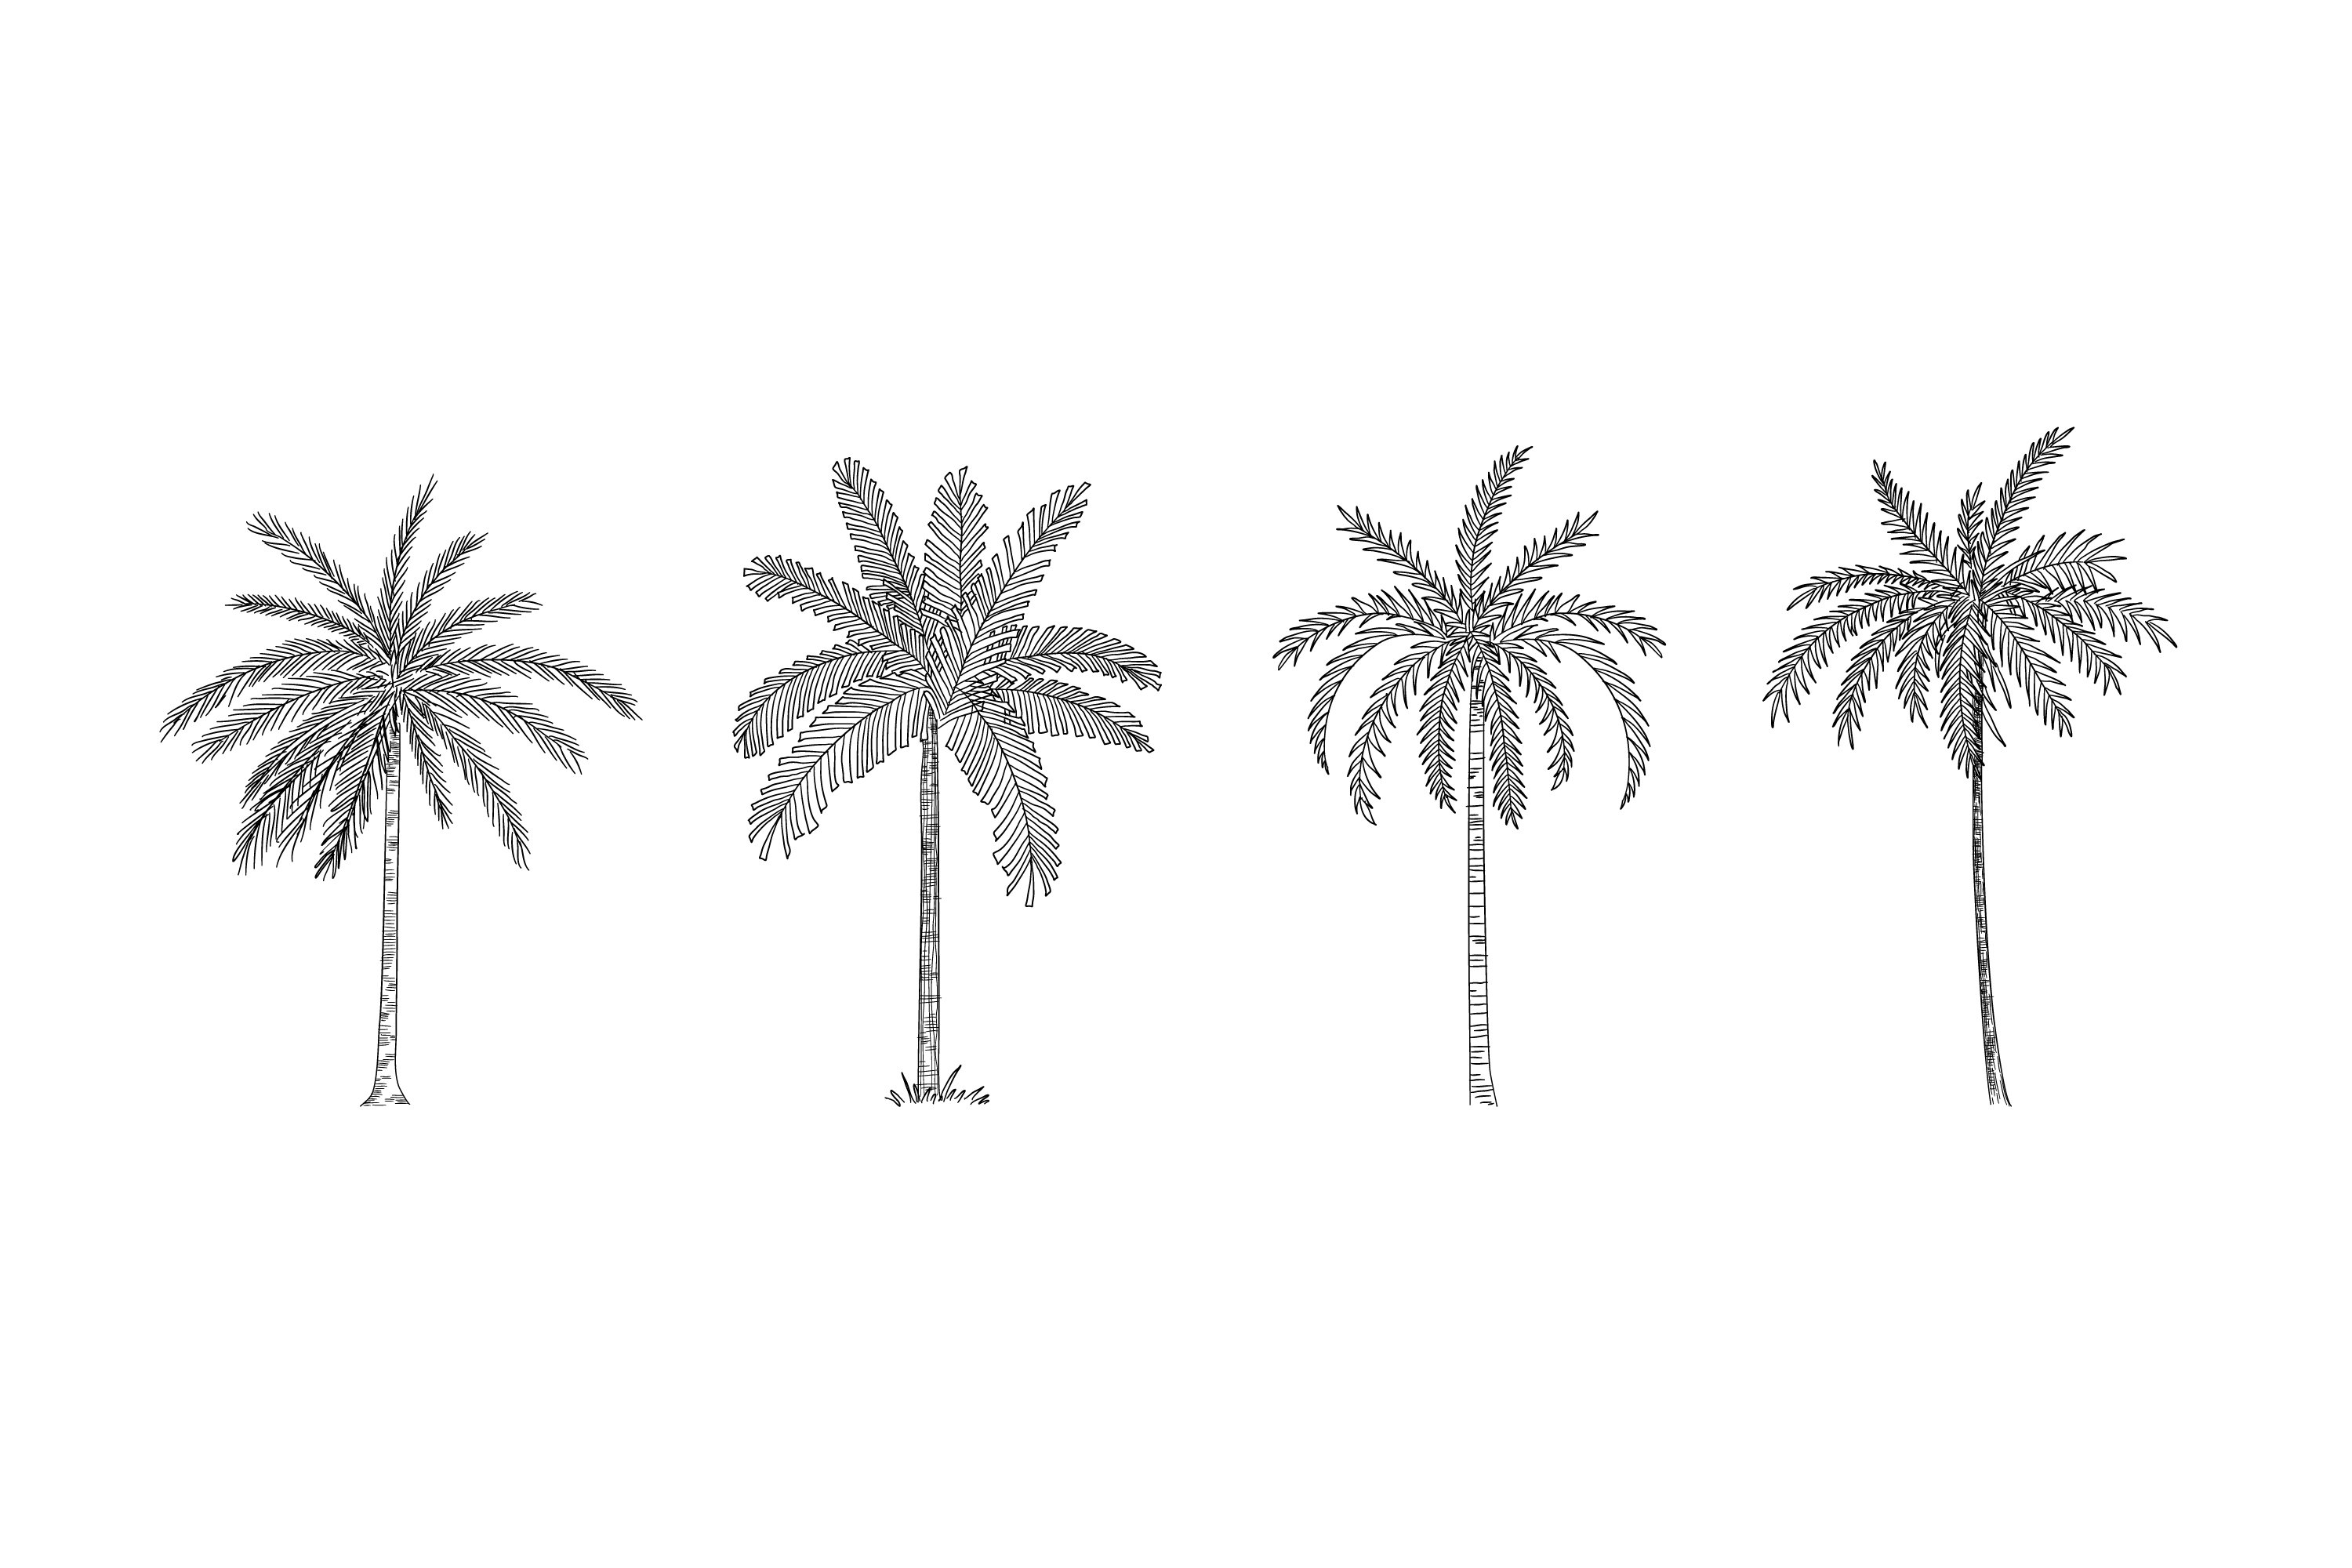 Drawing of three palm trees on a white background.